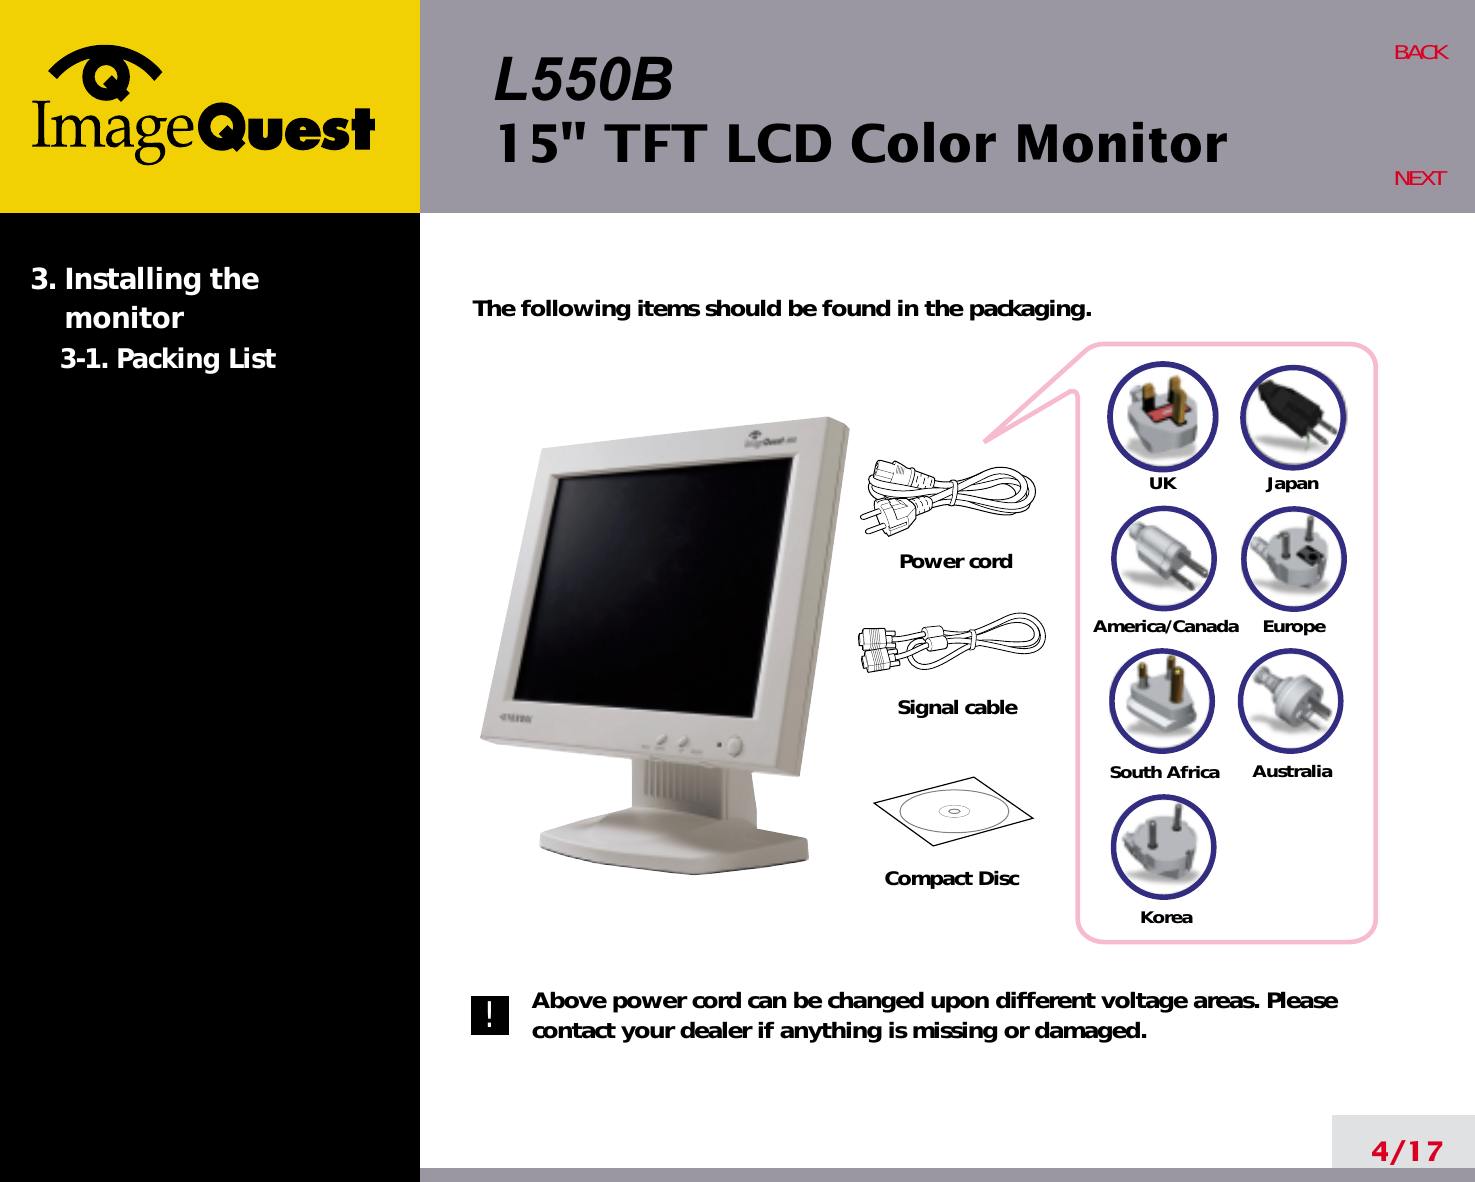 L550B15&quot; TFT LCD Color Monitor4/17BACKNEXTThe following items should be found in the packaging.Above power cord can be changed upon different voltage areas. Pleasecontact your dealer if anything is missing or damaged.3. Installing the monitor3-1. Packing List!UKAmerica/CanadaJapanAustraliaKoreaEuropeSouth AfricaPower cordSignal cableCompact Disc